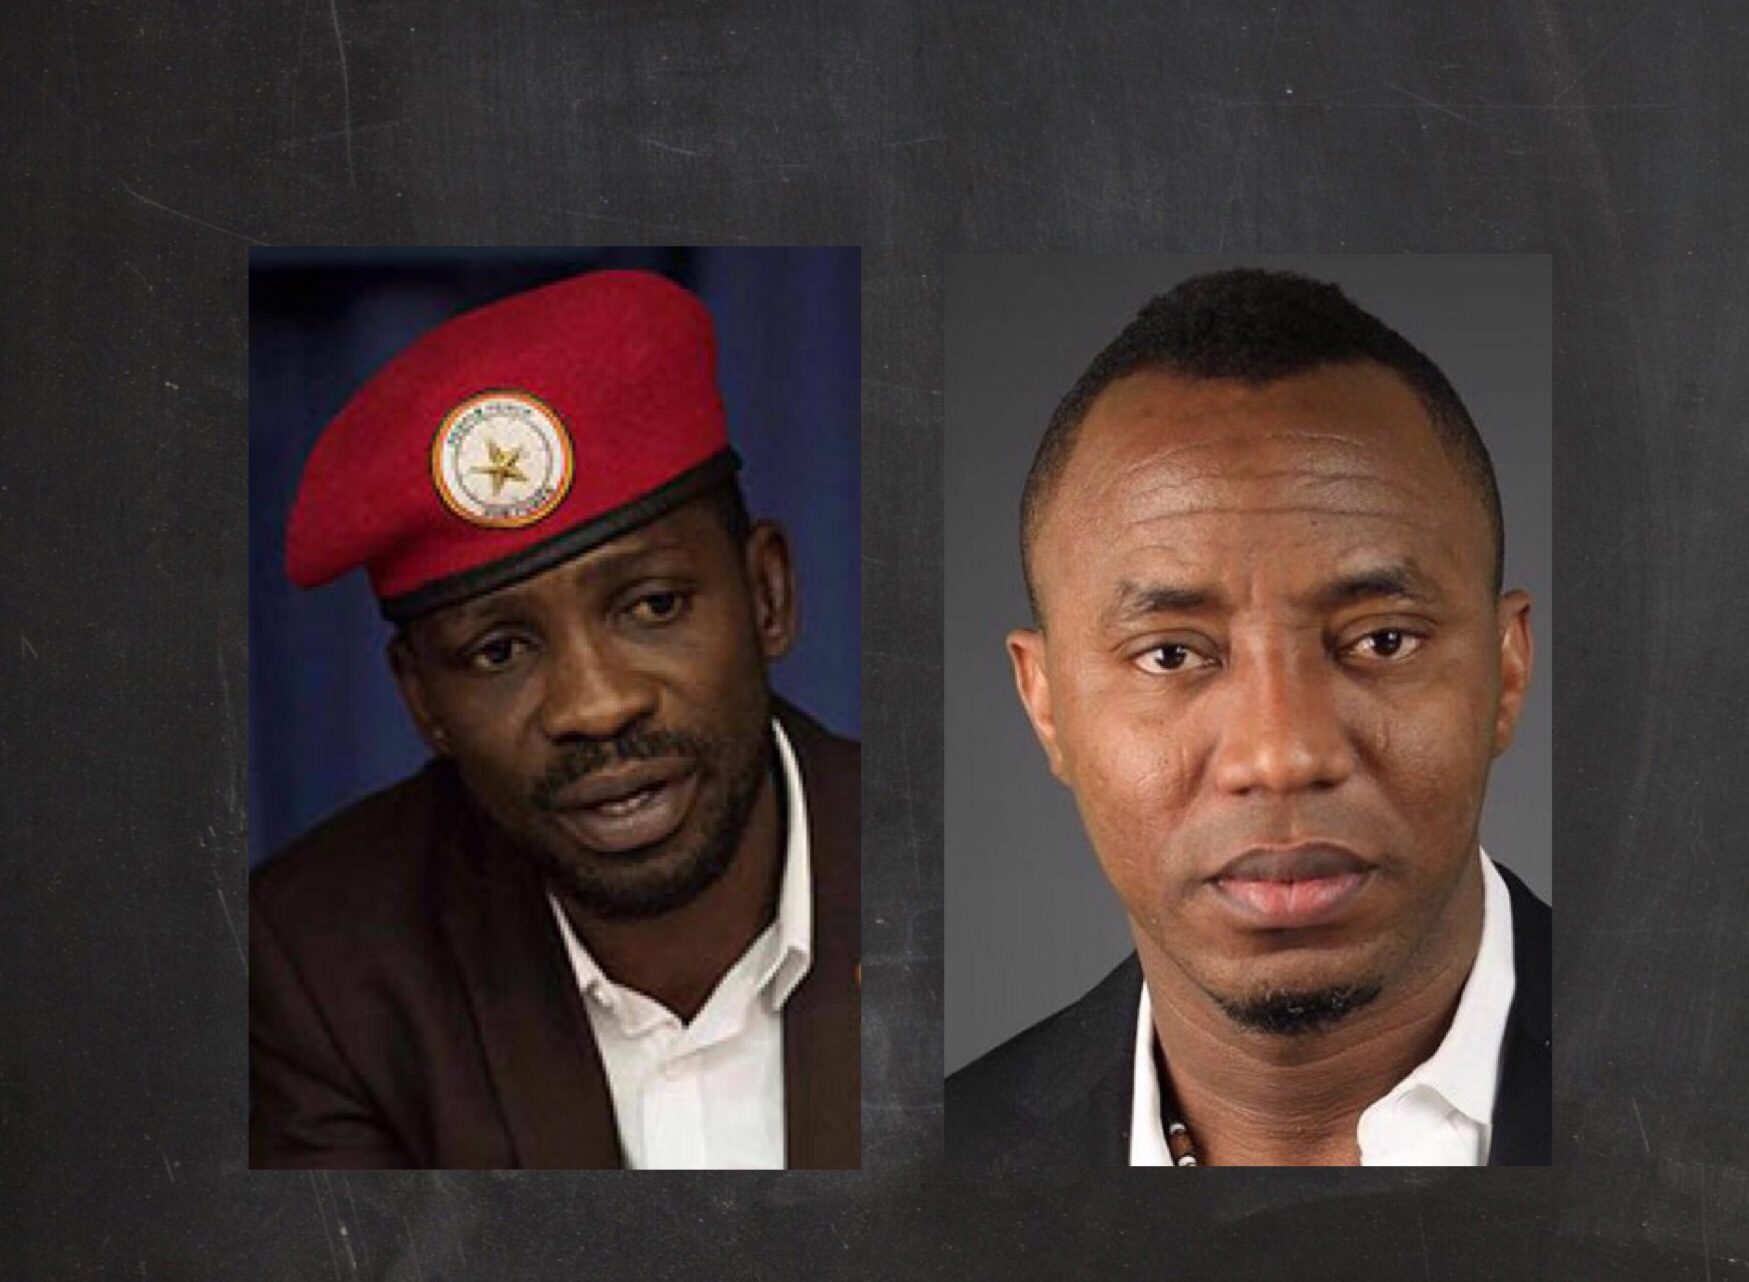 Bobi Wine (left) is a Ugandan musician and lawmaker recently making the headlines for his activism and defiance of President Yoweri Museveni. Omoyele Sowore (right) is a Nigerian journalist and presidential aspirant known for his opposition to impunity and corruption. Both individuals represent new hopes for a continent bereaved by greedy politicians and backward policies still, they do not have it all figured out.